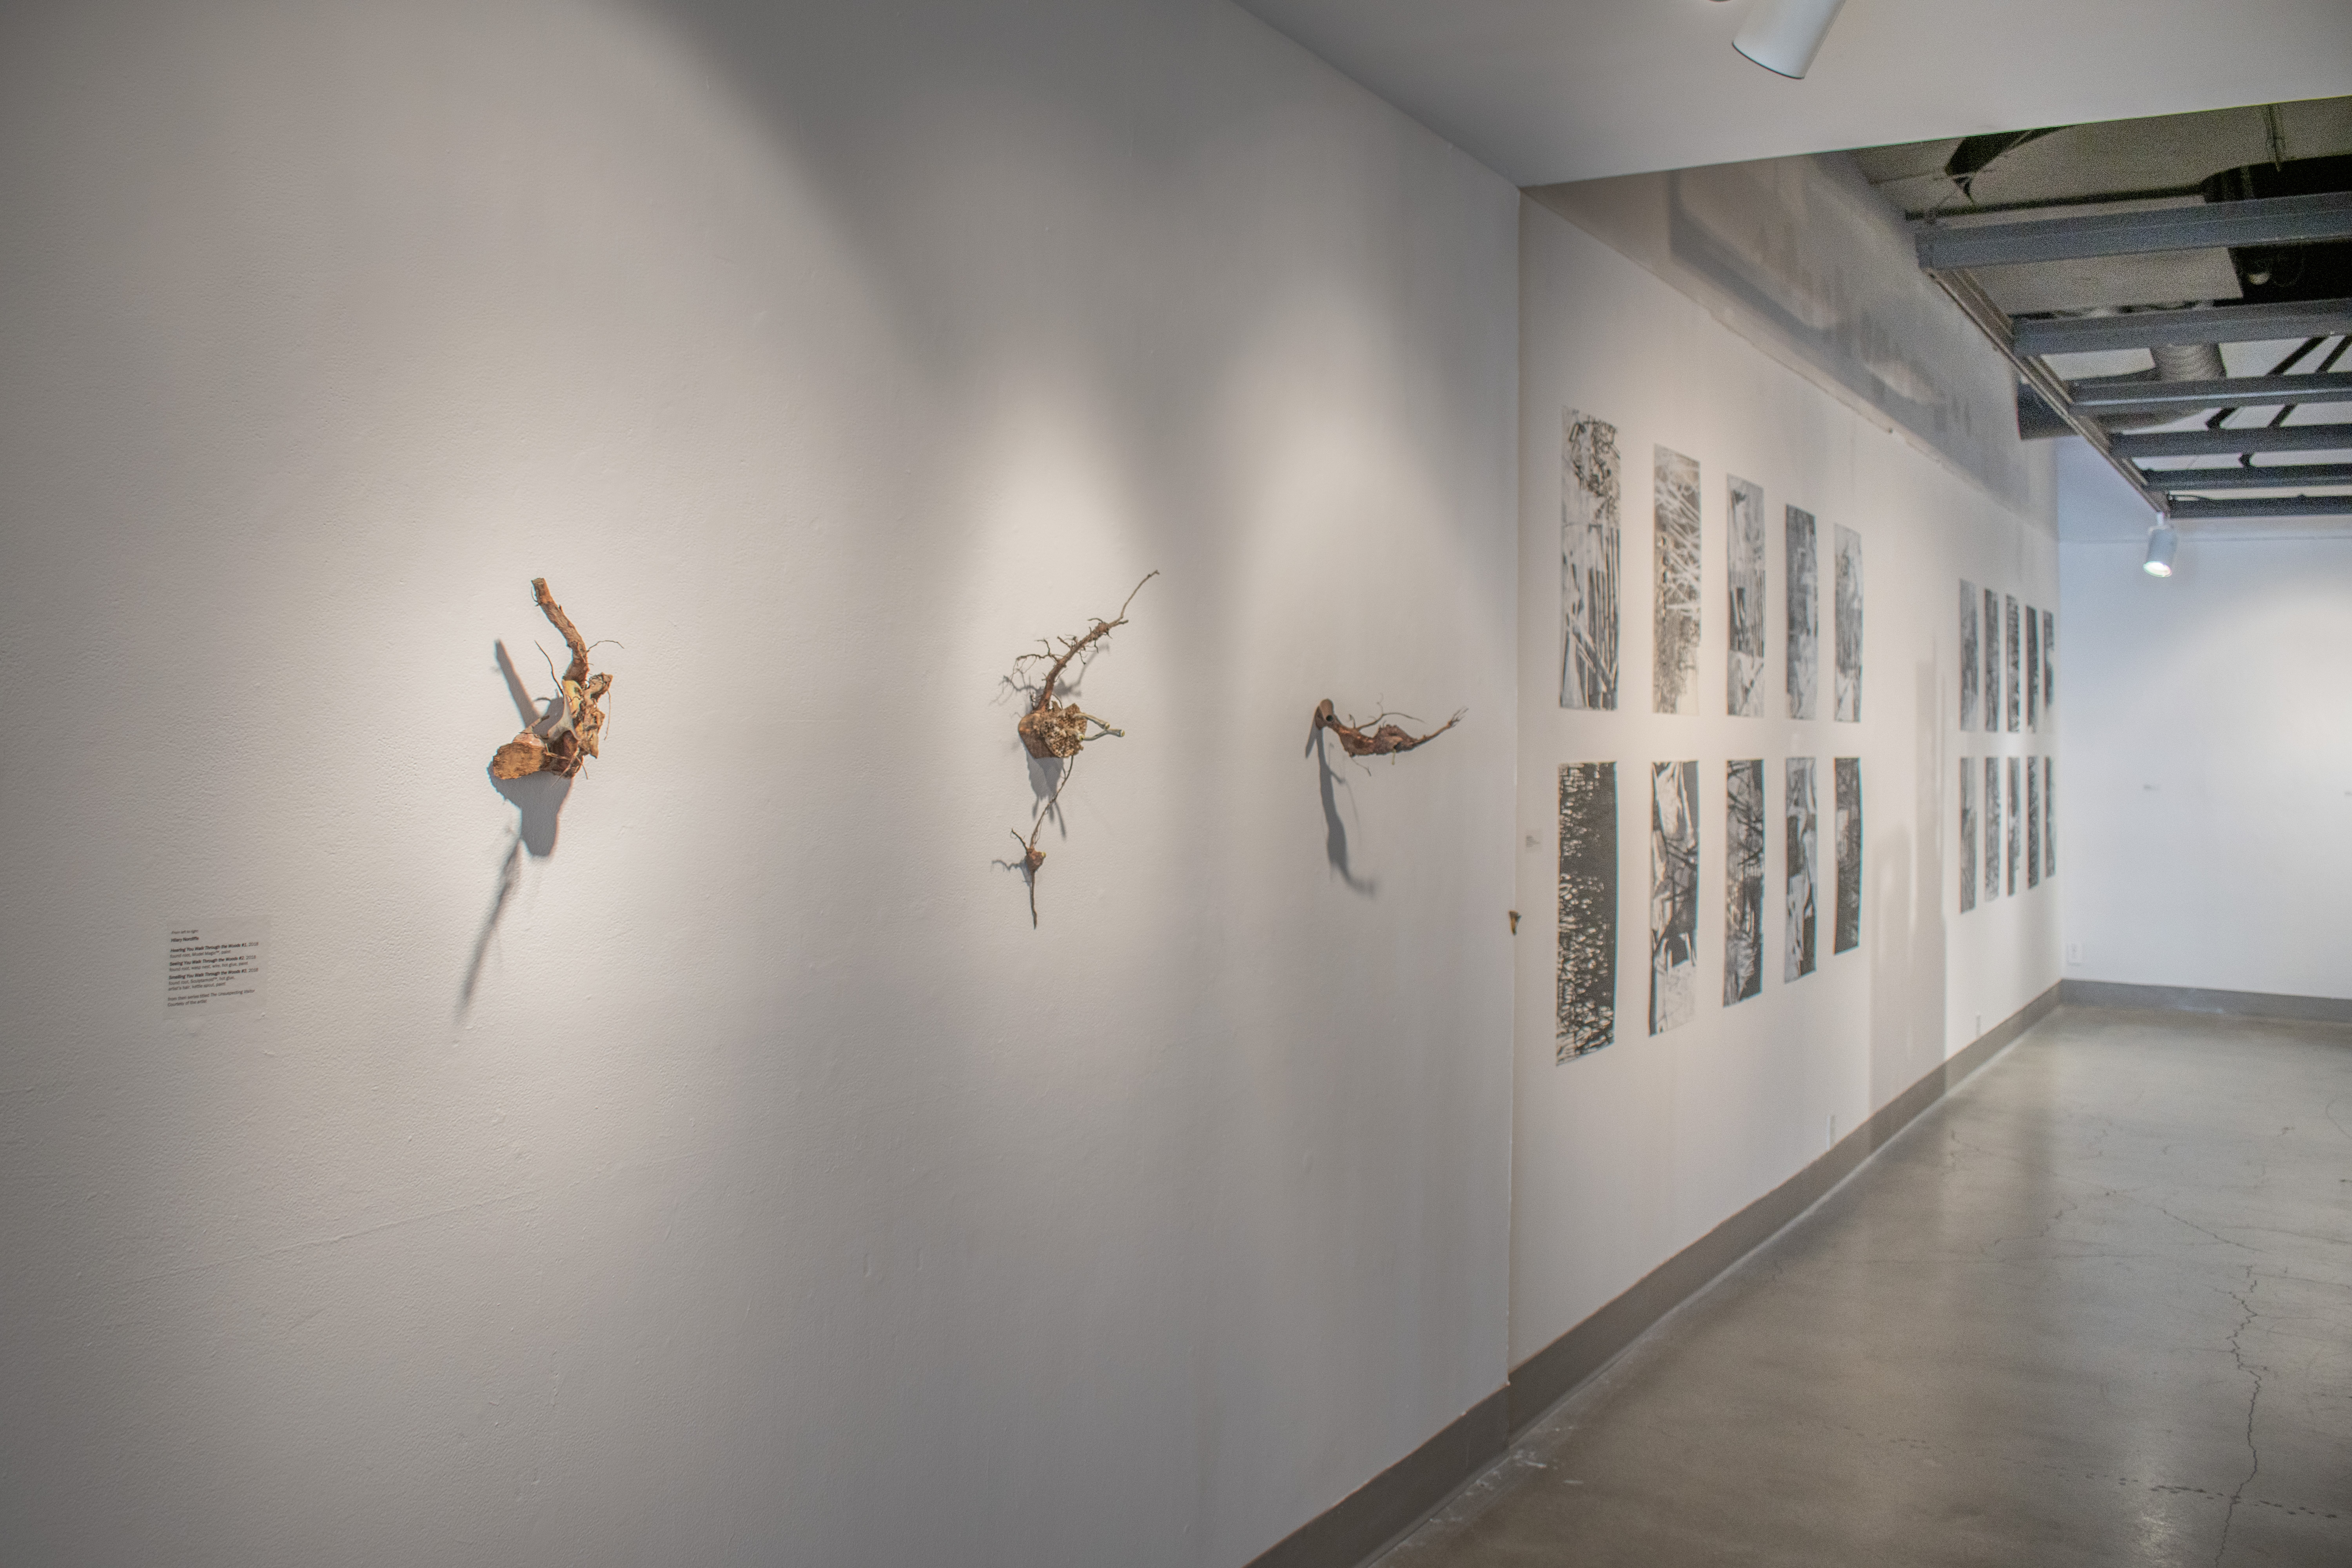 Installation View, Corridor of Gallery, St. Broxville Wood: Into the Thicket Exhibition. Artists: Jennifer Gunlock, Hilary Norcliffe, and Katie Stubblefield